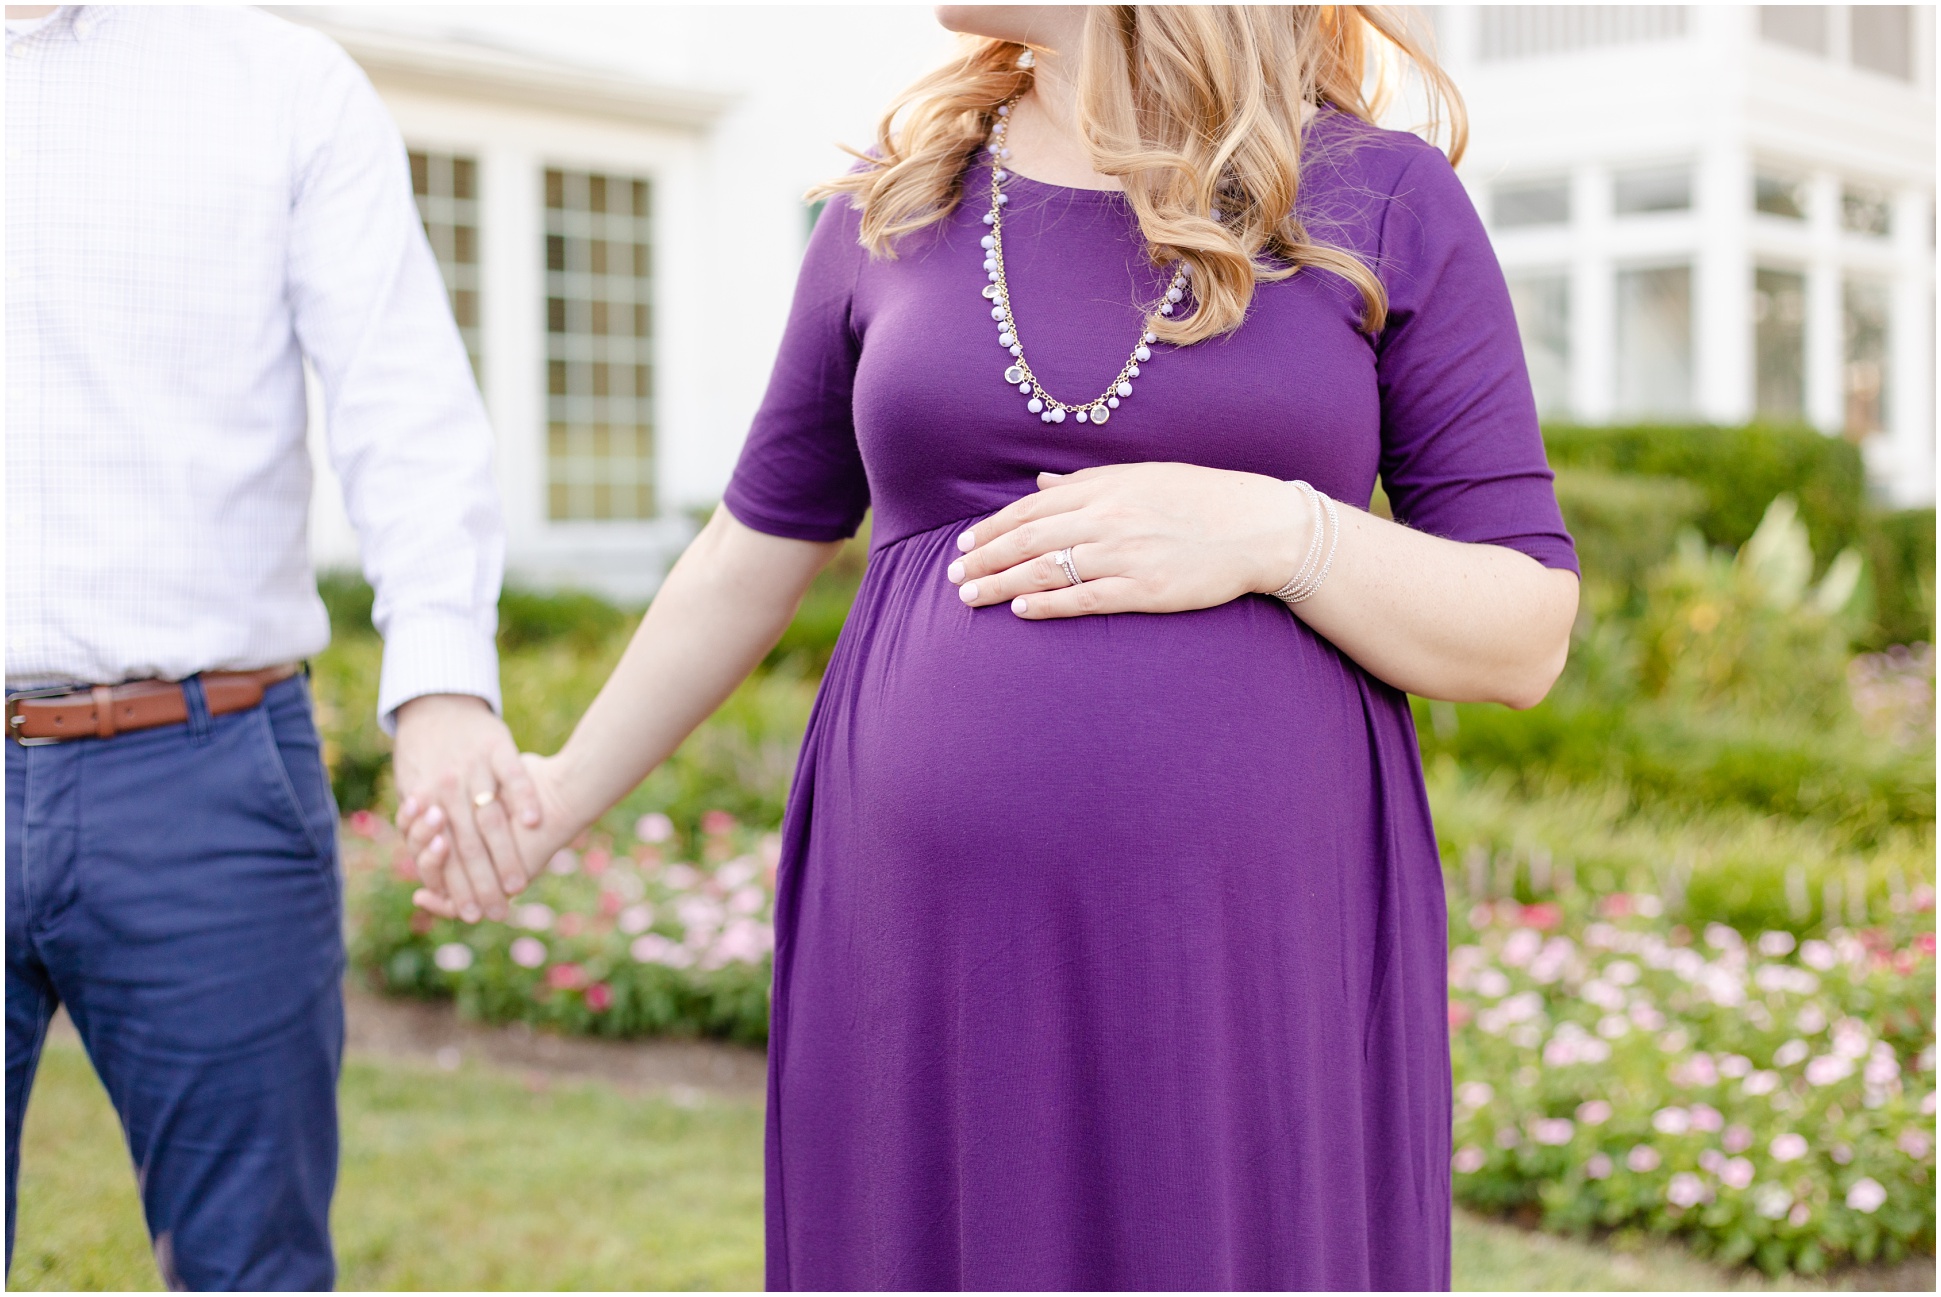 Pregnant mom wearing a purple maternity dress, beaded necklace, and her hand on her baby bump